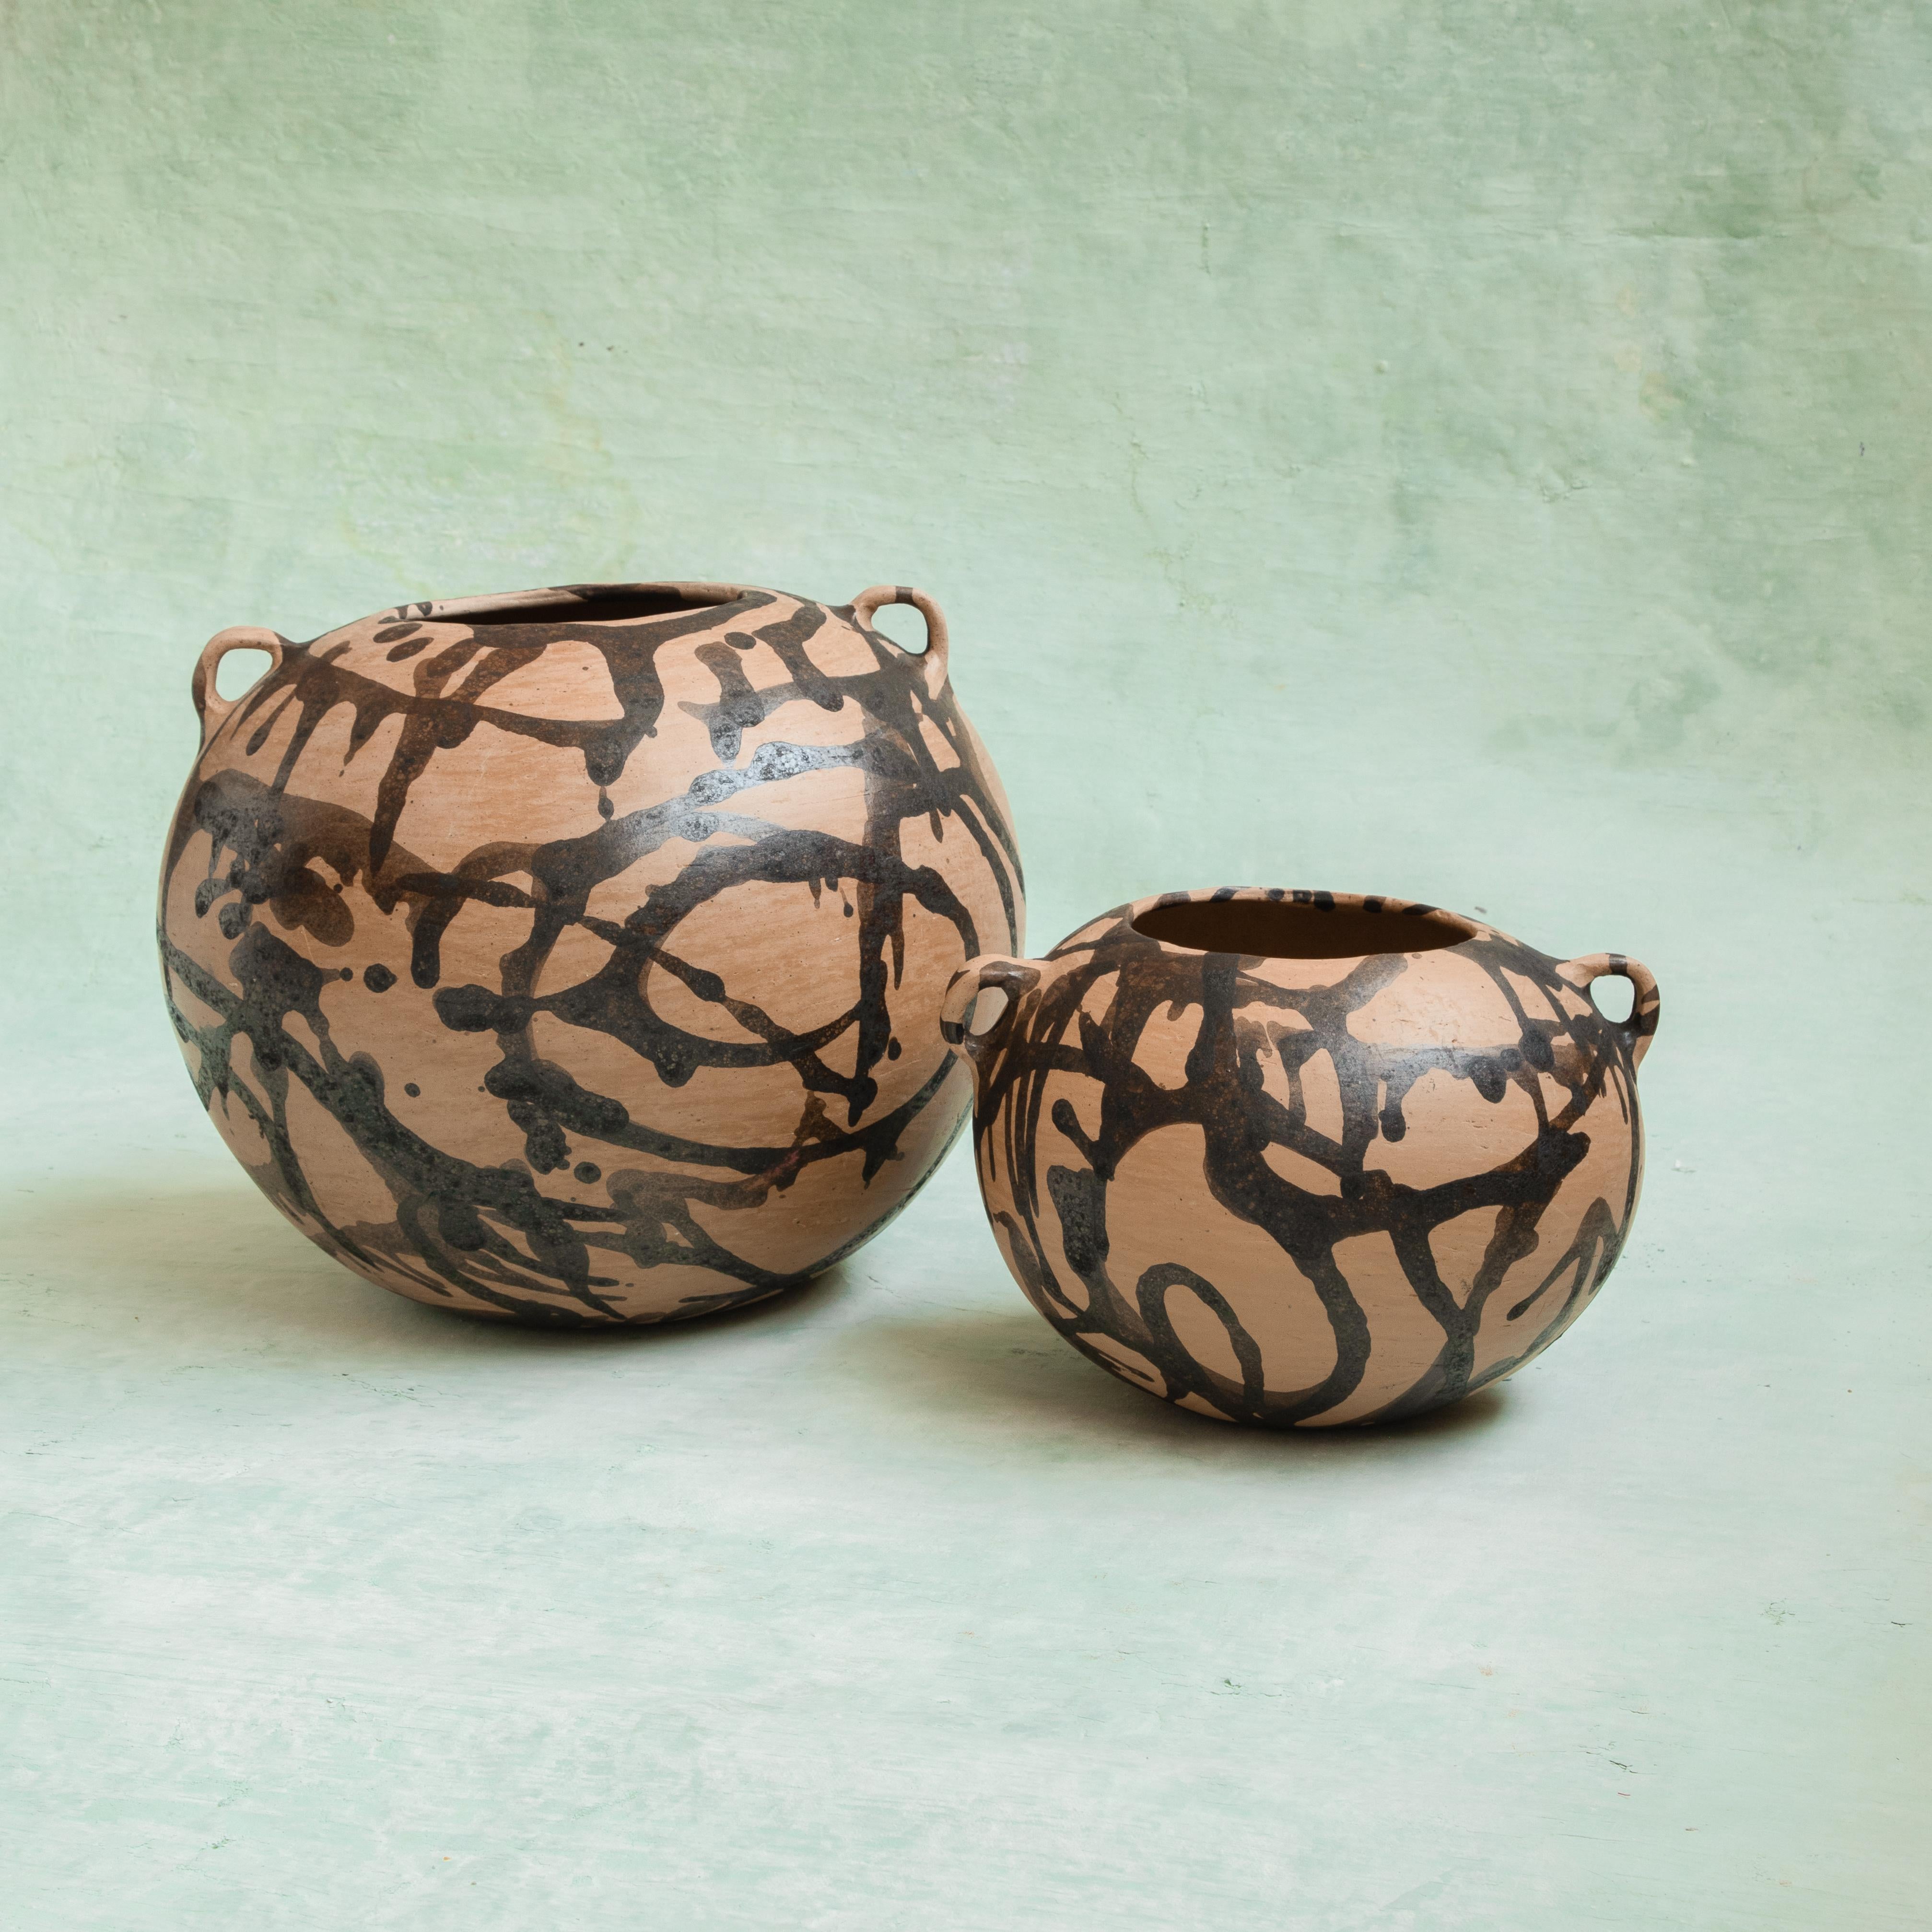 Pair of Tonaltepec Pots by Onora
Dimensions:
 D 30 x H 20 cm
 D 23 x H 18 cm
Materials: Terracotta

Terracotta pots hand modeled and painted using a splatter technique using oak bark dye, an endemic and ancient technique of Santo Domingo